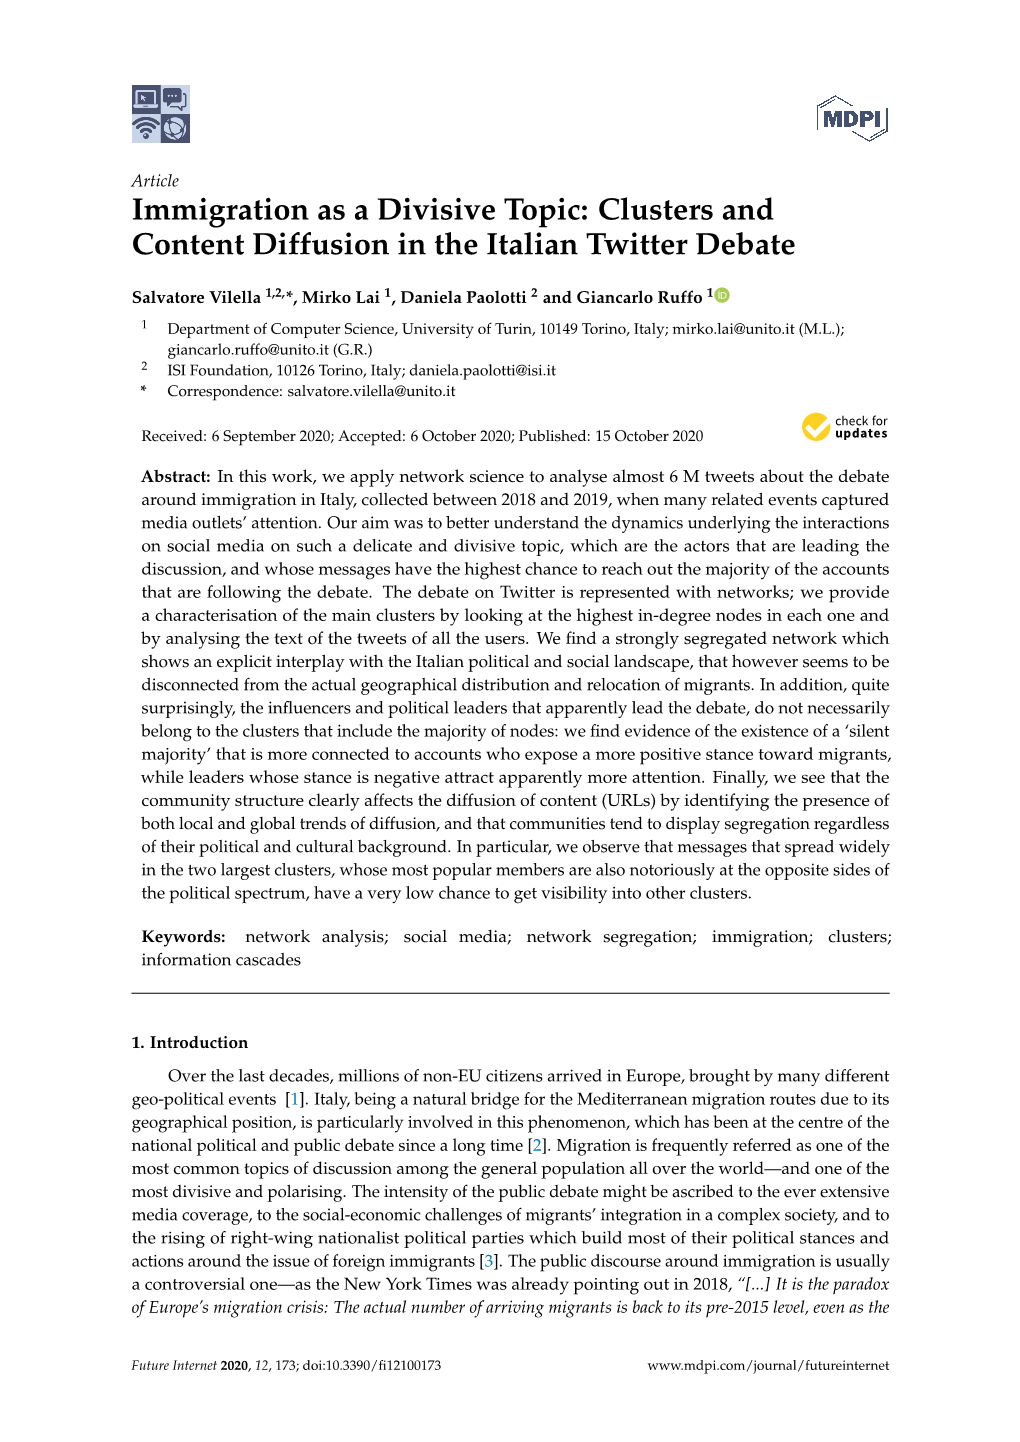 Immigration As a Divisive Topic: Clusters and Content Diffusion in the Italian Twitter Debate